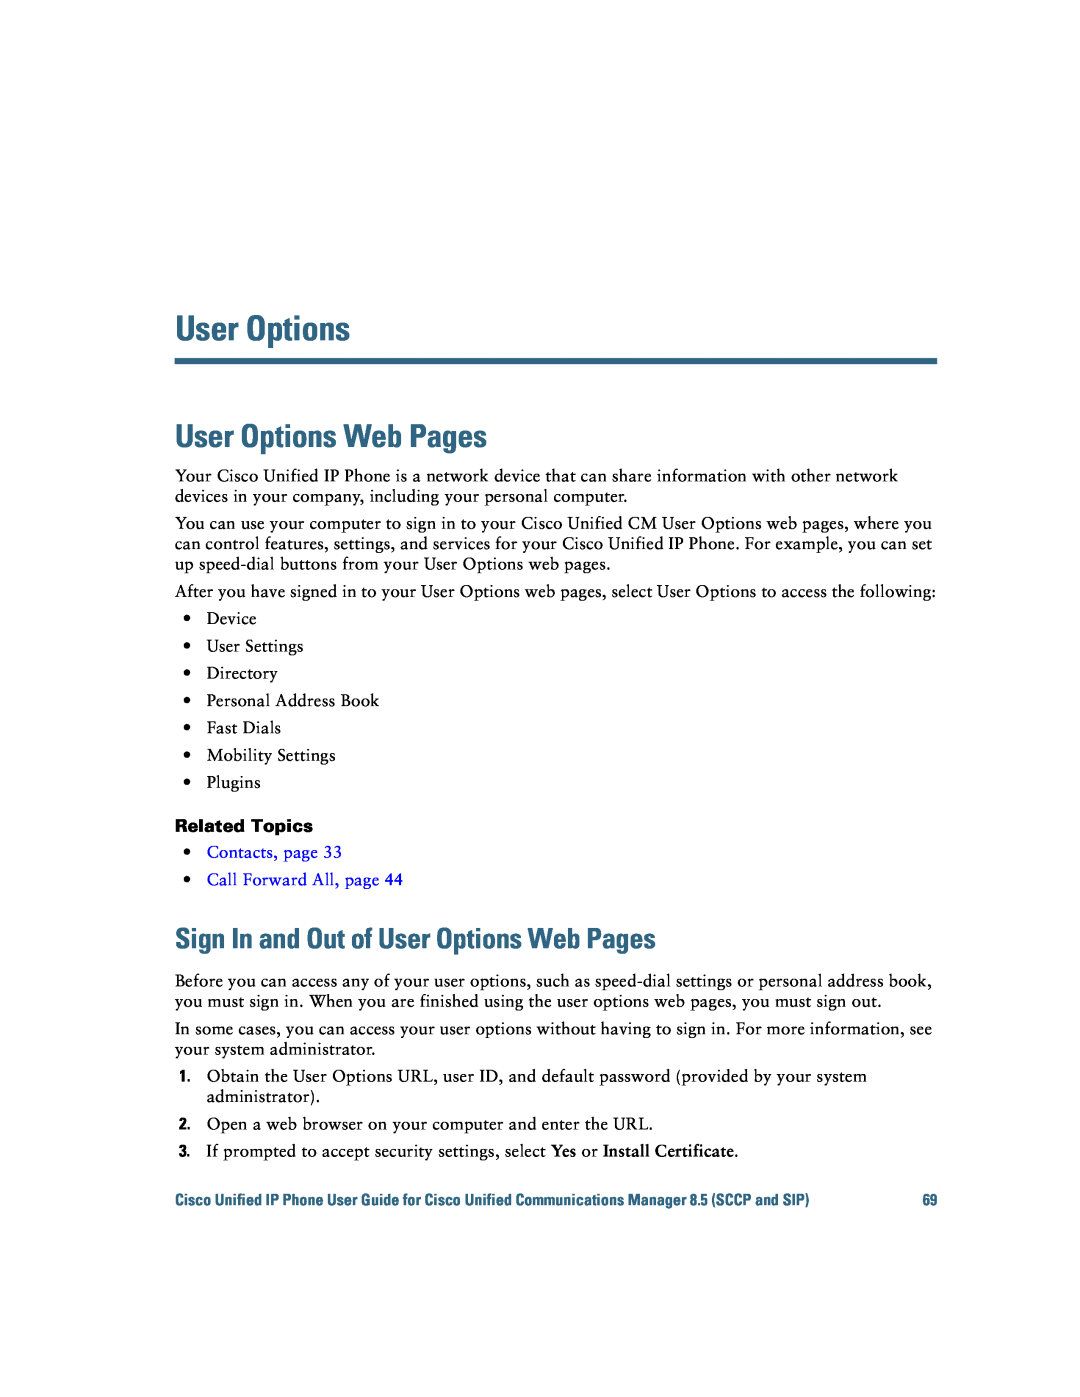 Cisco Systems IP Phone 8941 and 8945 manual Sign In and Out of User Options Web Pages, Related Topics 